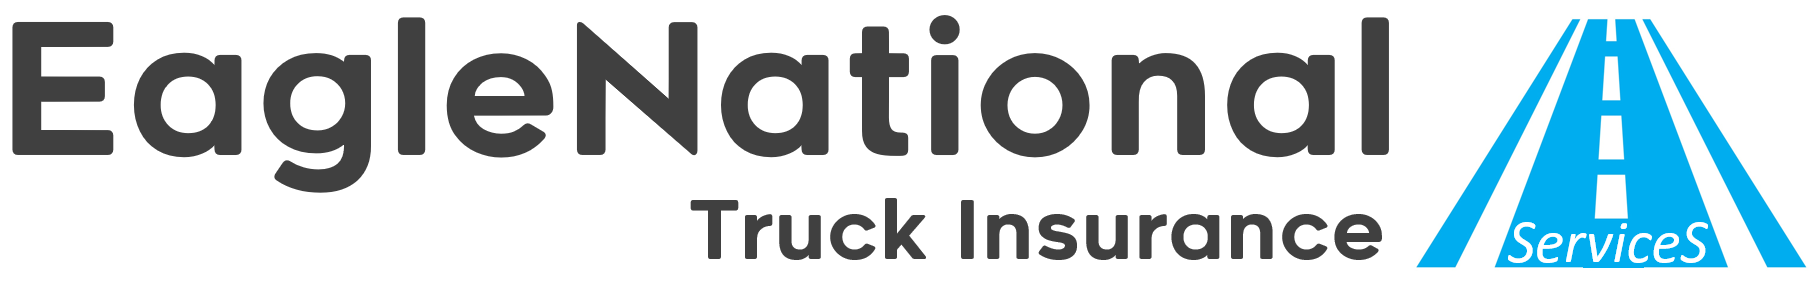 Eagle National Truck Insurance Services